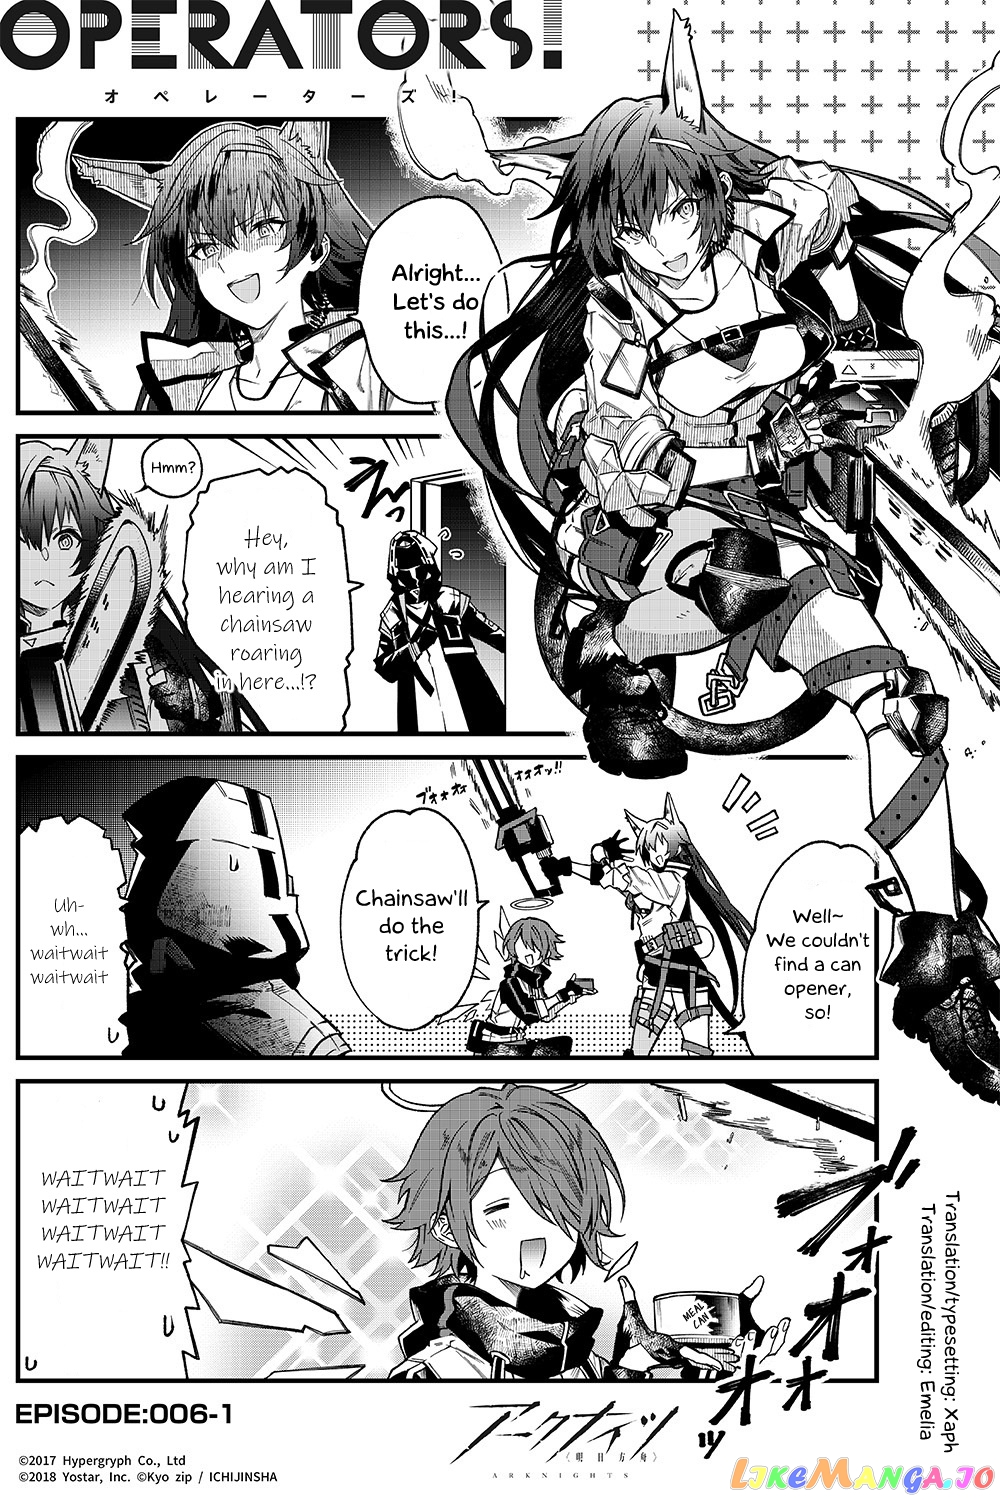 Arknights: OPERATORS! chapter 6.1 - page 1